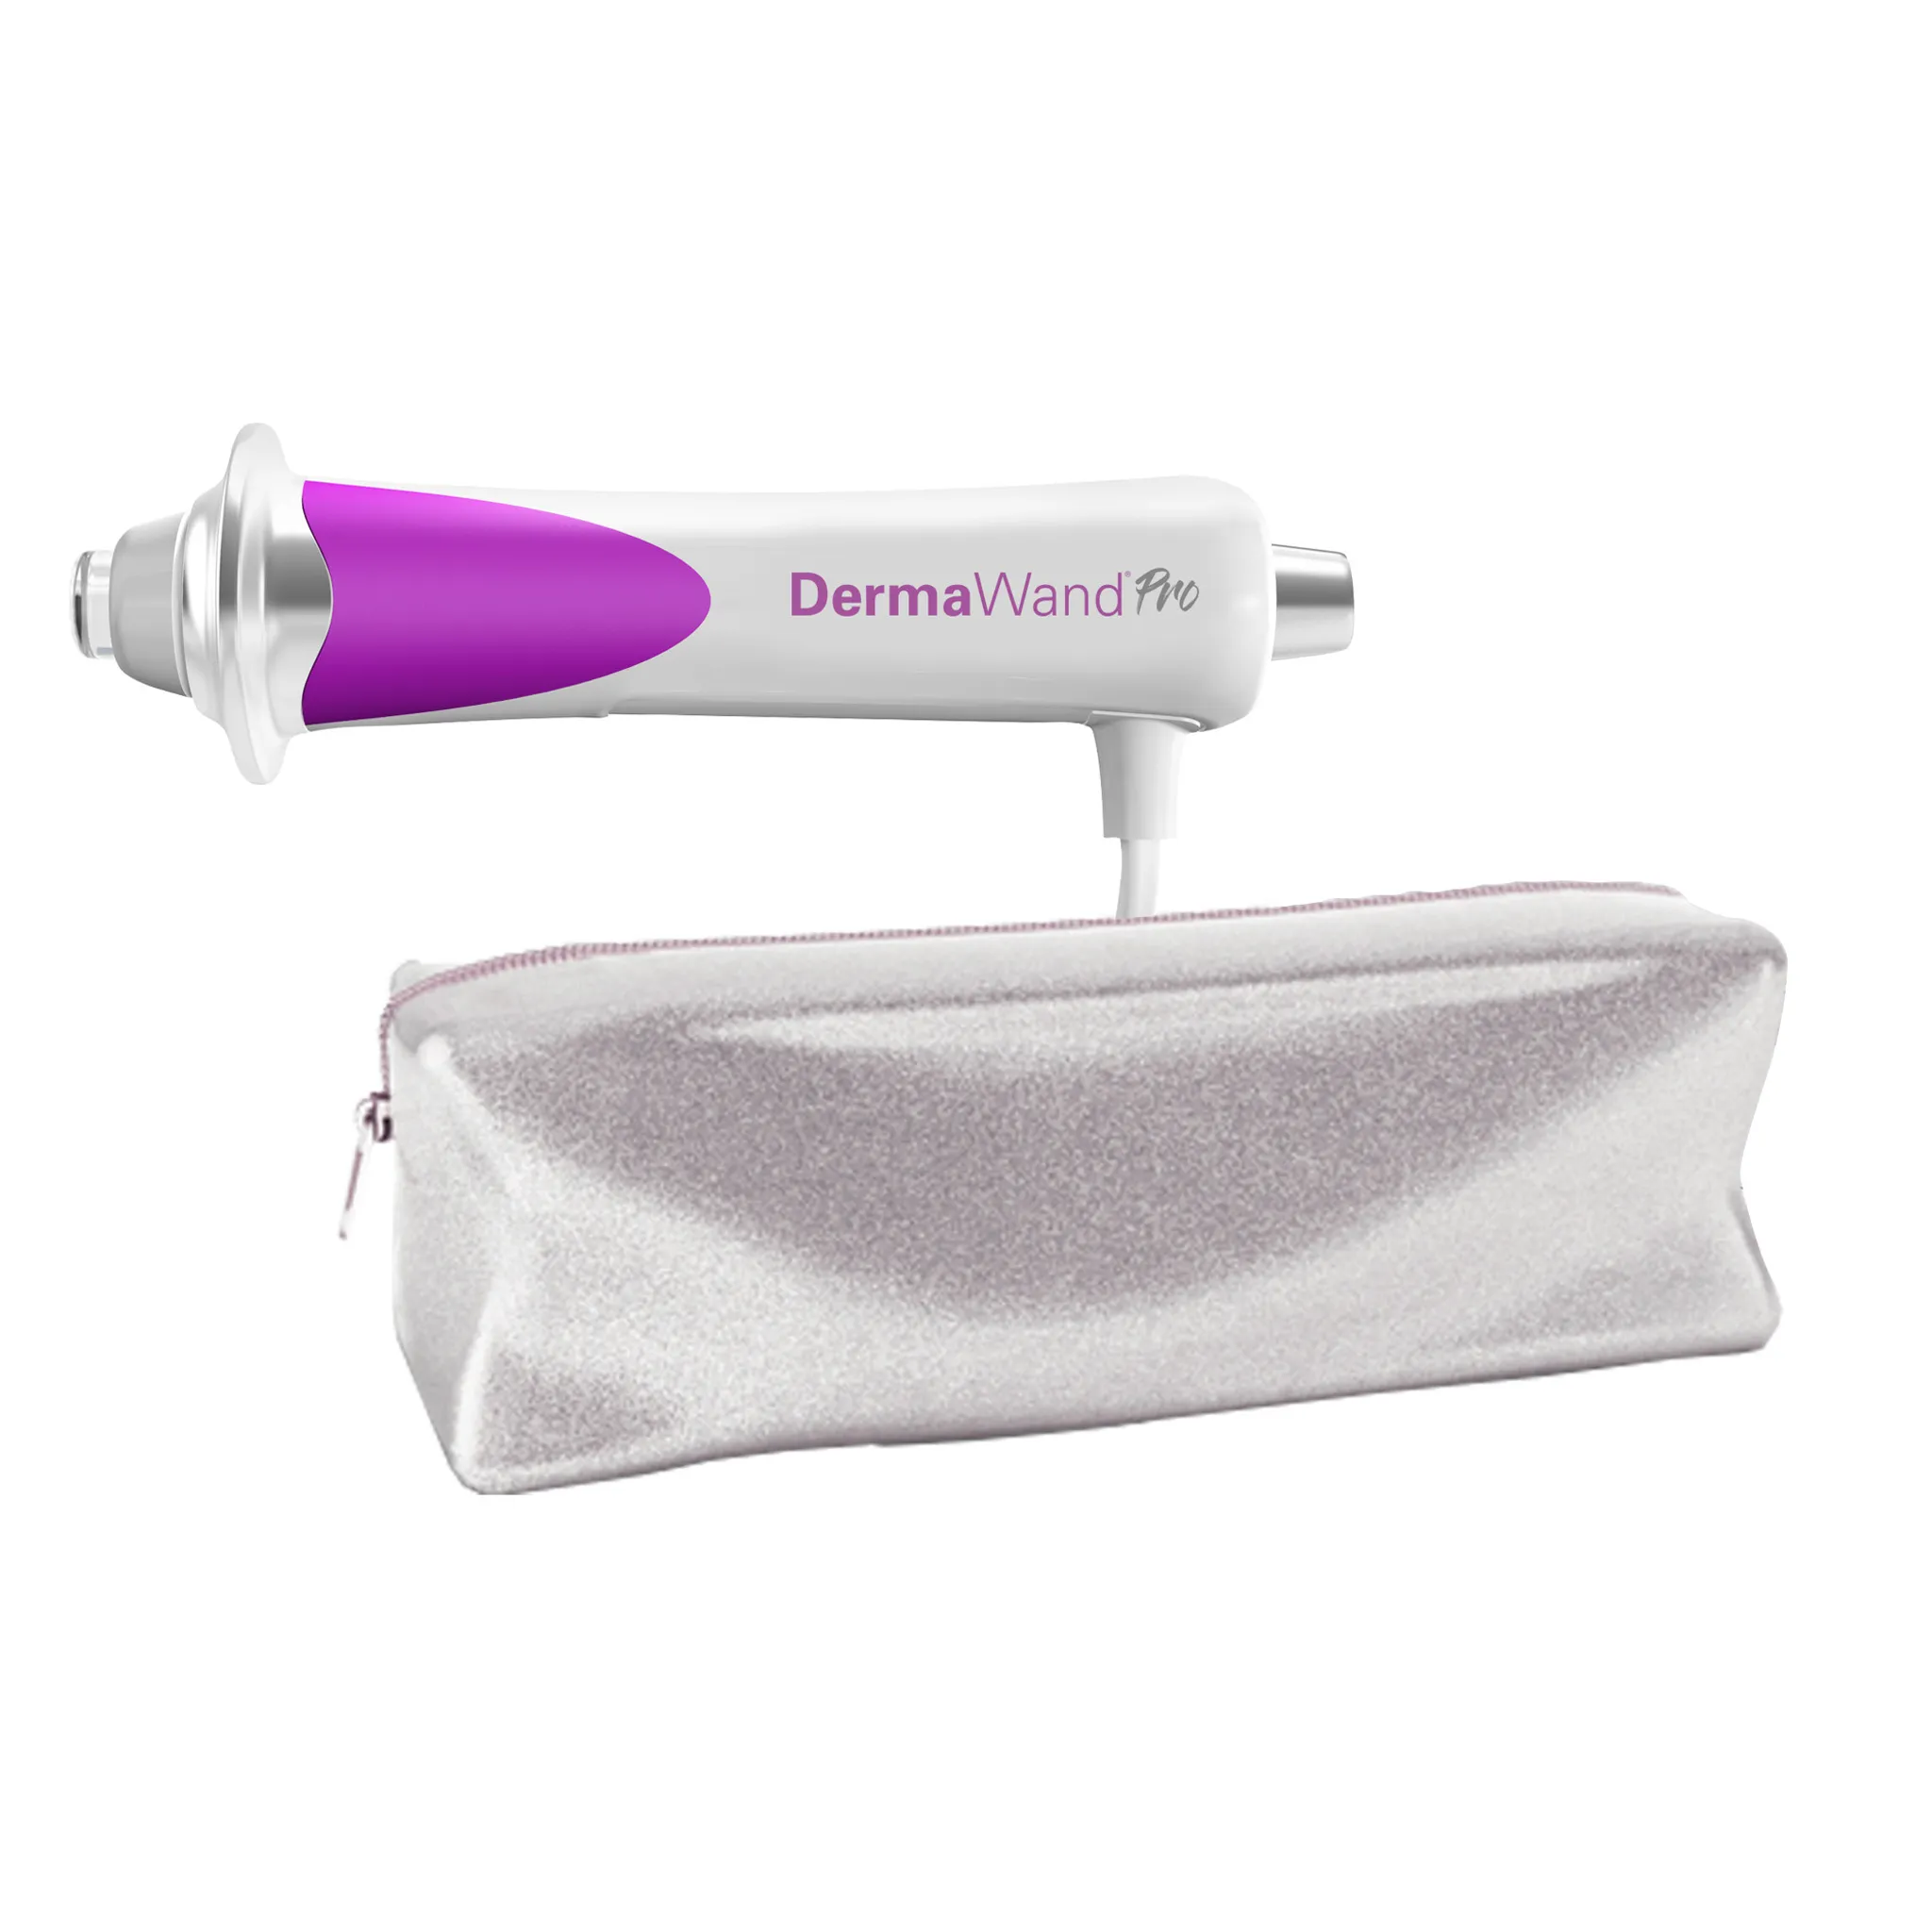 kaufland.de | DermaWand Pro - anti-aging tool with revitalizing effect